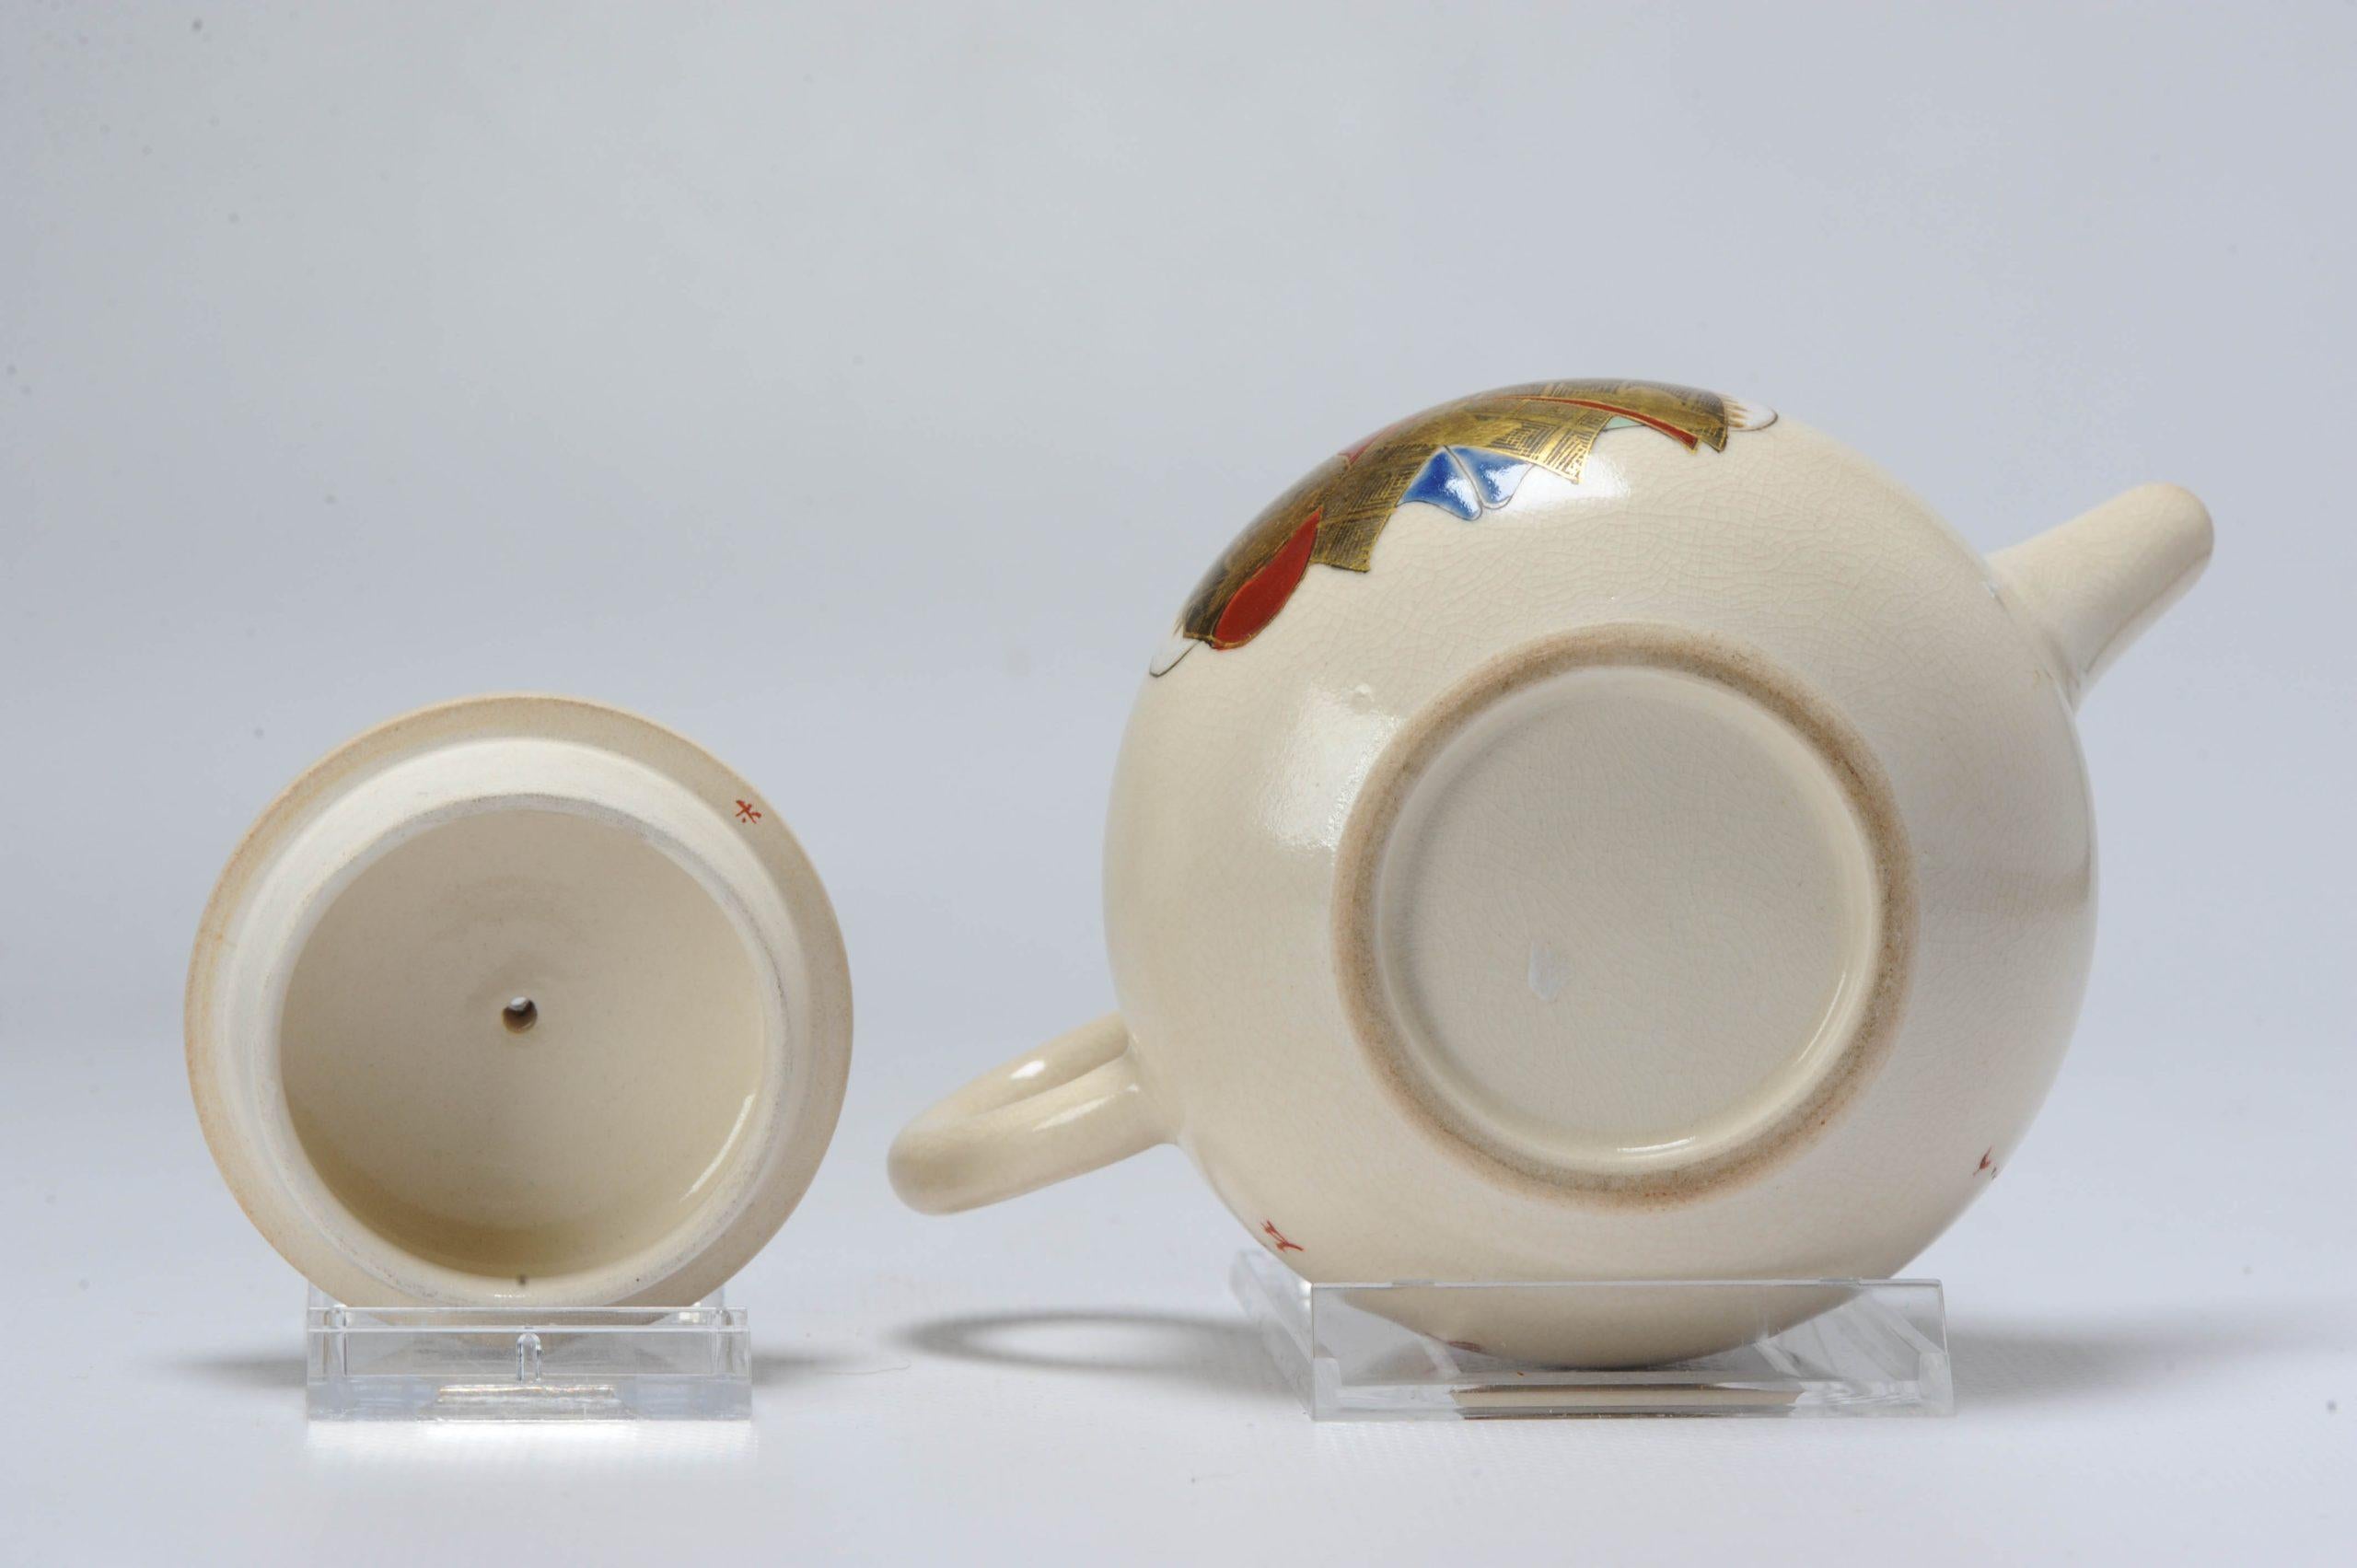 Antique Signed Satsuma Teapot Fujiware no Teika, Late 19th/Early 20th Century In Good Condition For Sale In Amsterdam, Noord Holland